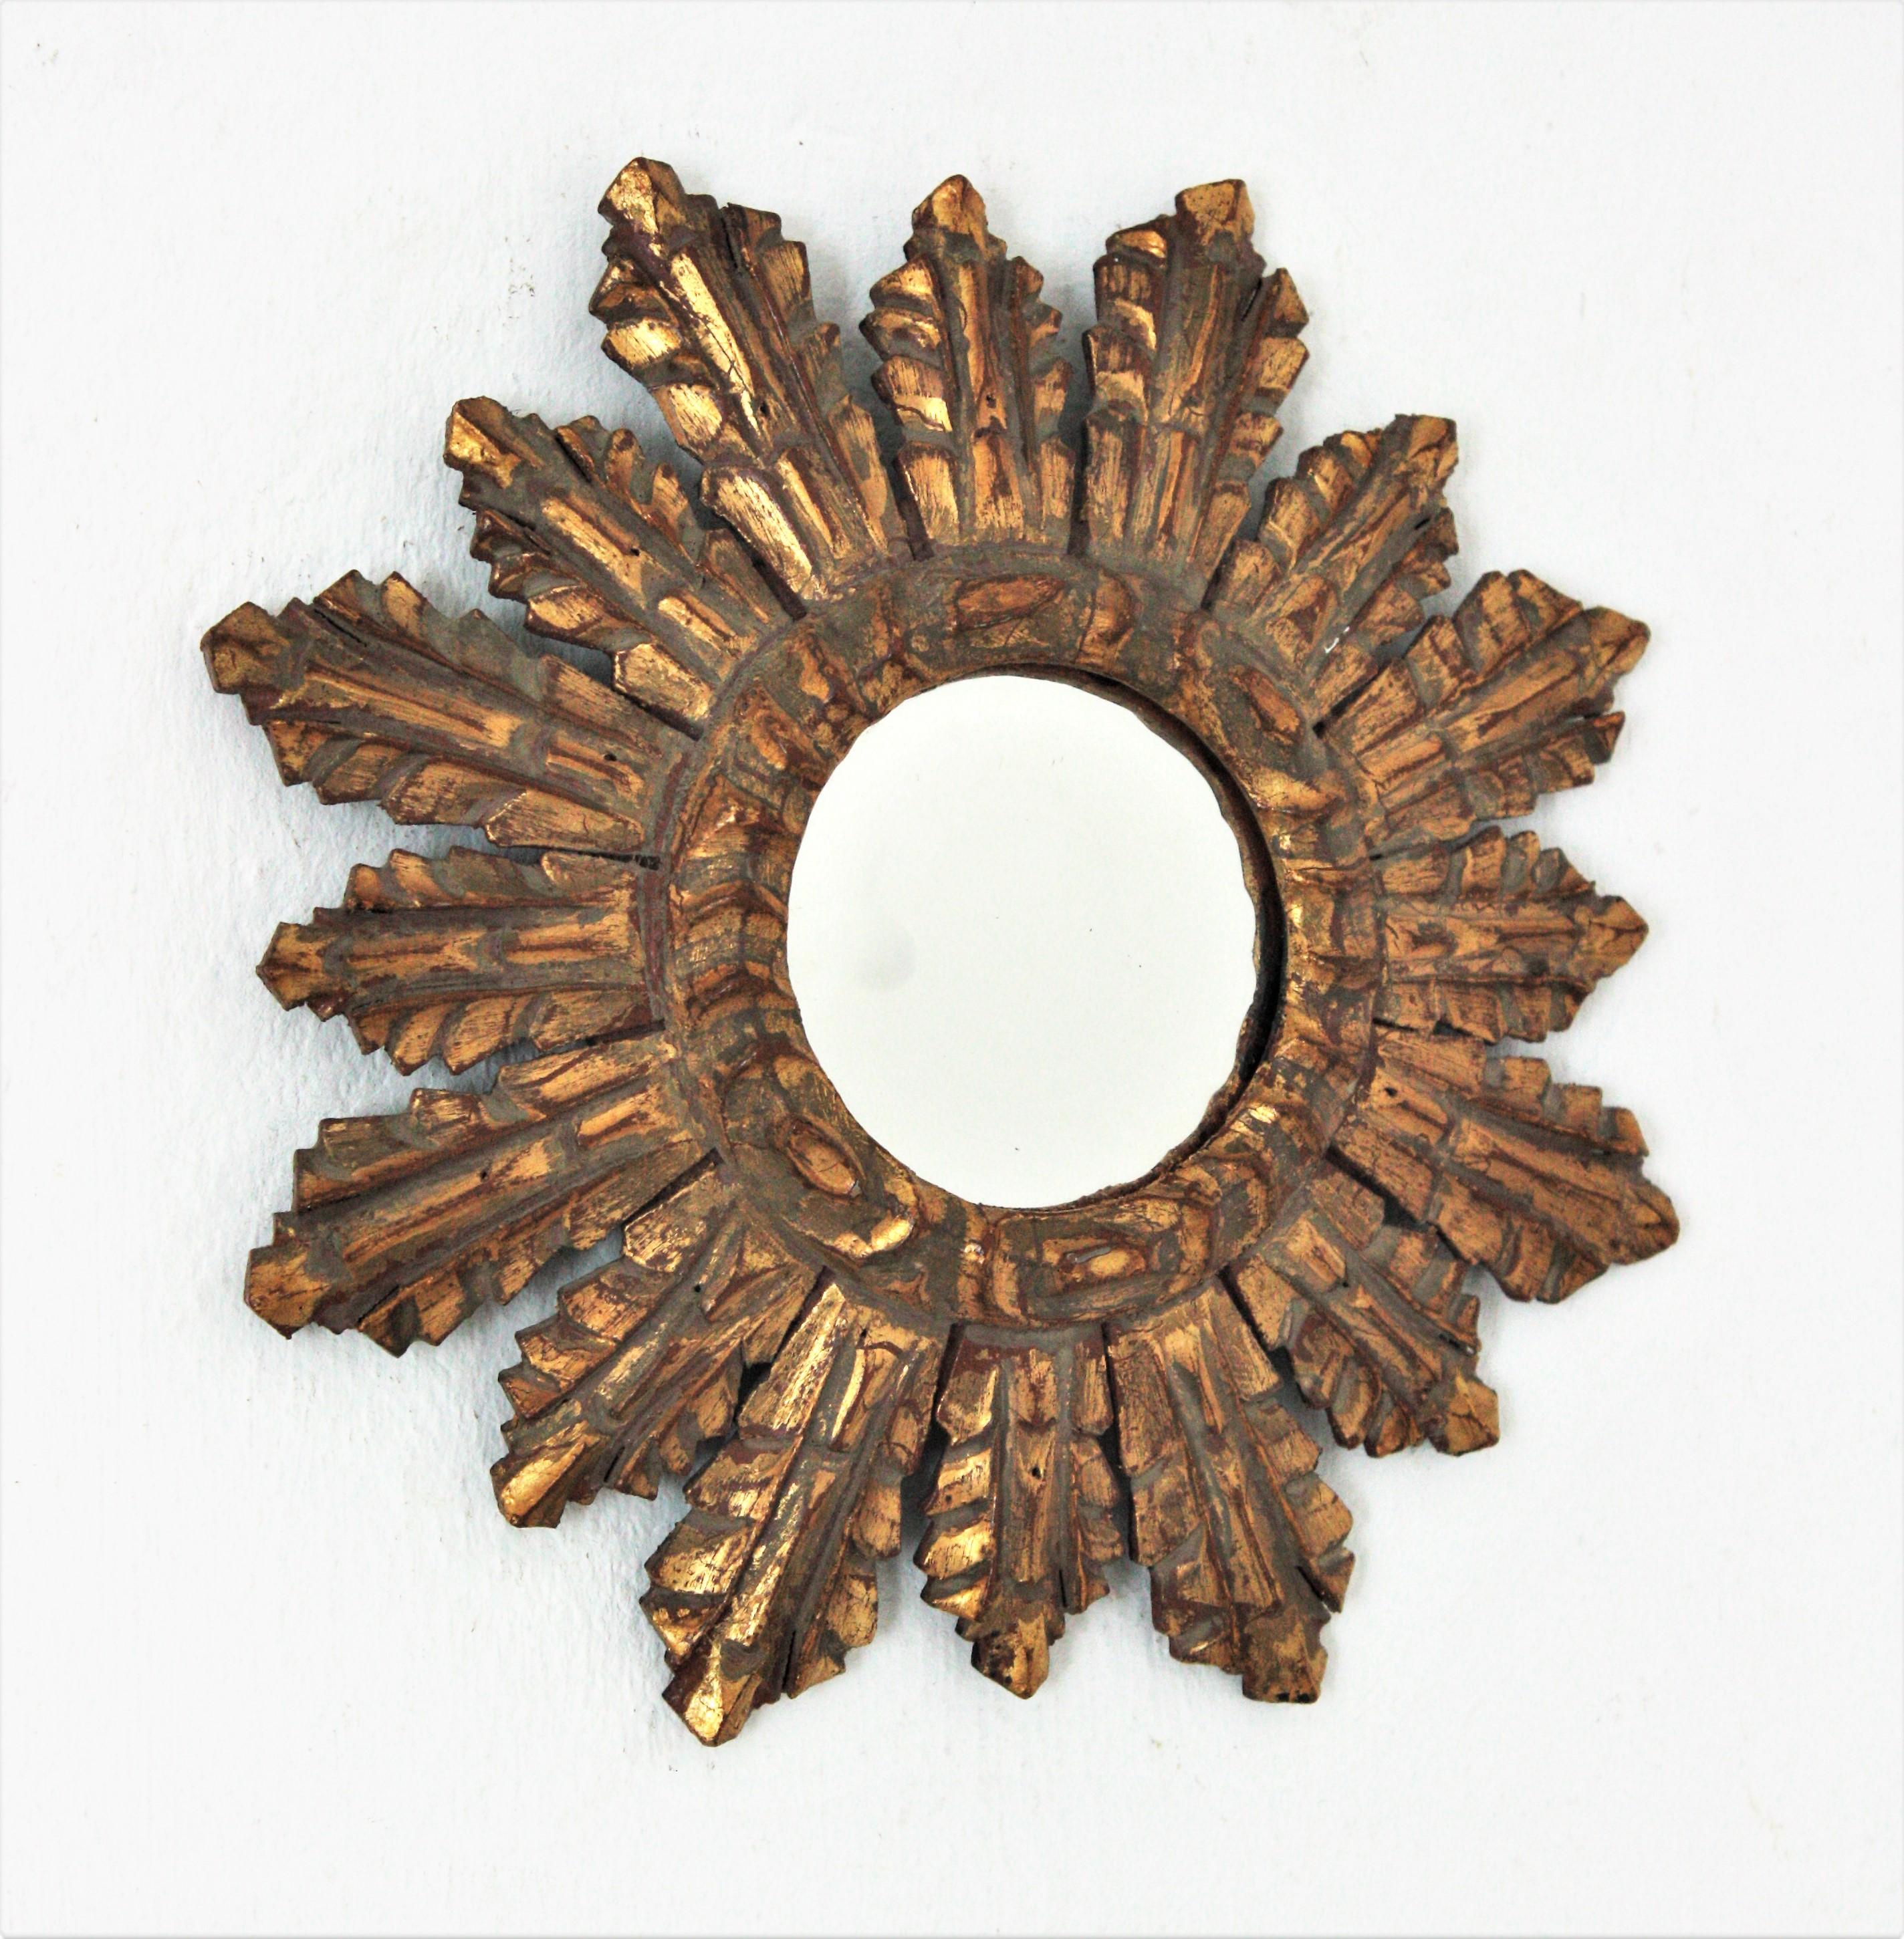 Mini sized sunburst convex mirror, carved wood, gold leaf. Spain, 1940s
Eye-catching finely carved sunburst mirror with convex glass.
Nice aged patina and original gold leaf gilding.
This lovely mini sunburst mirror will be interesting placed